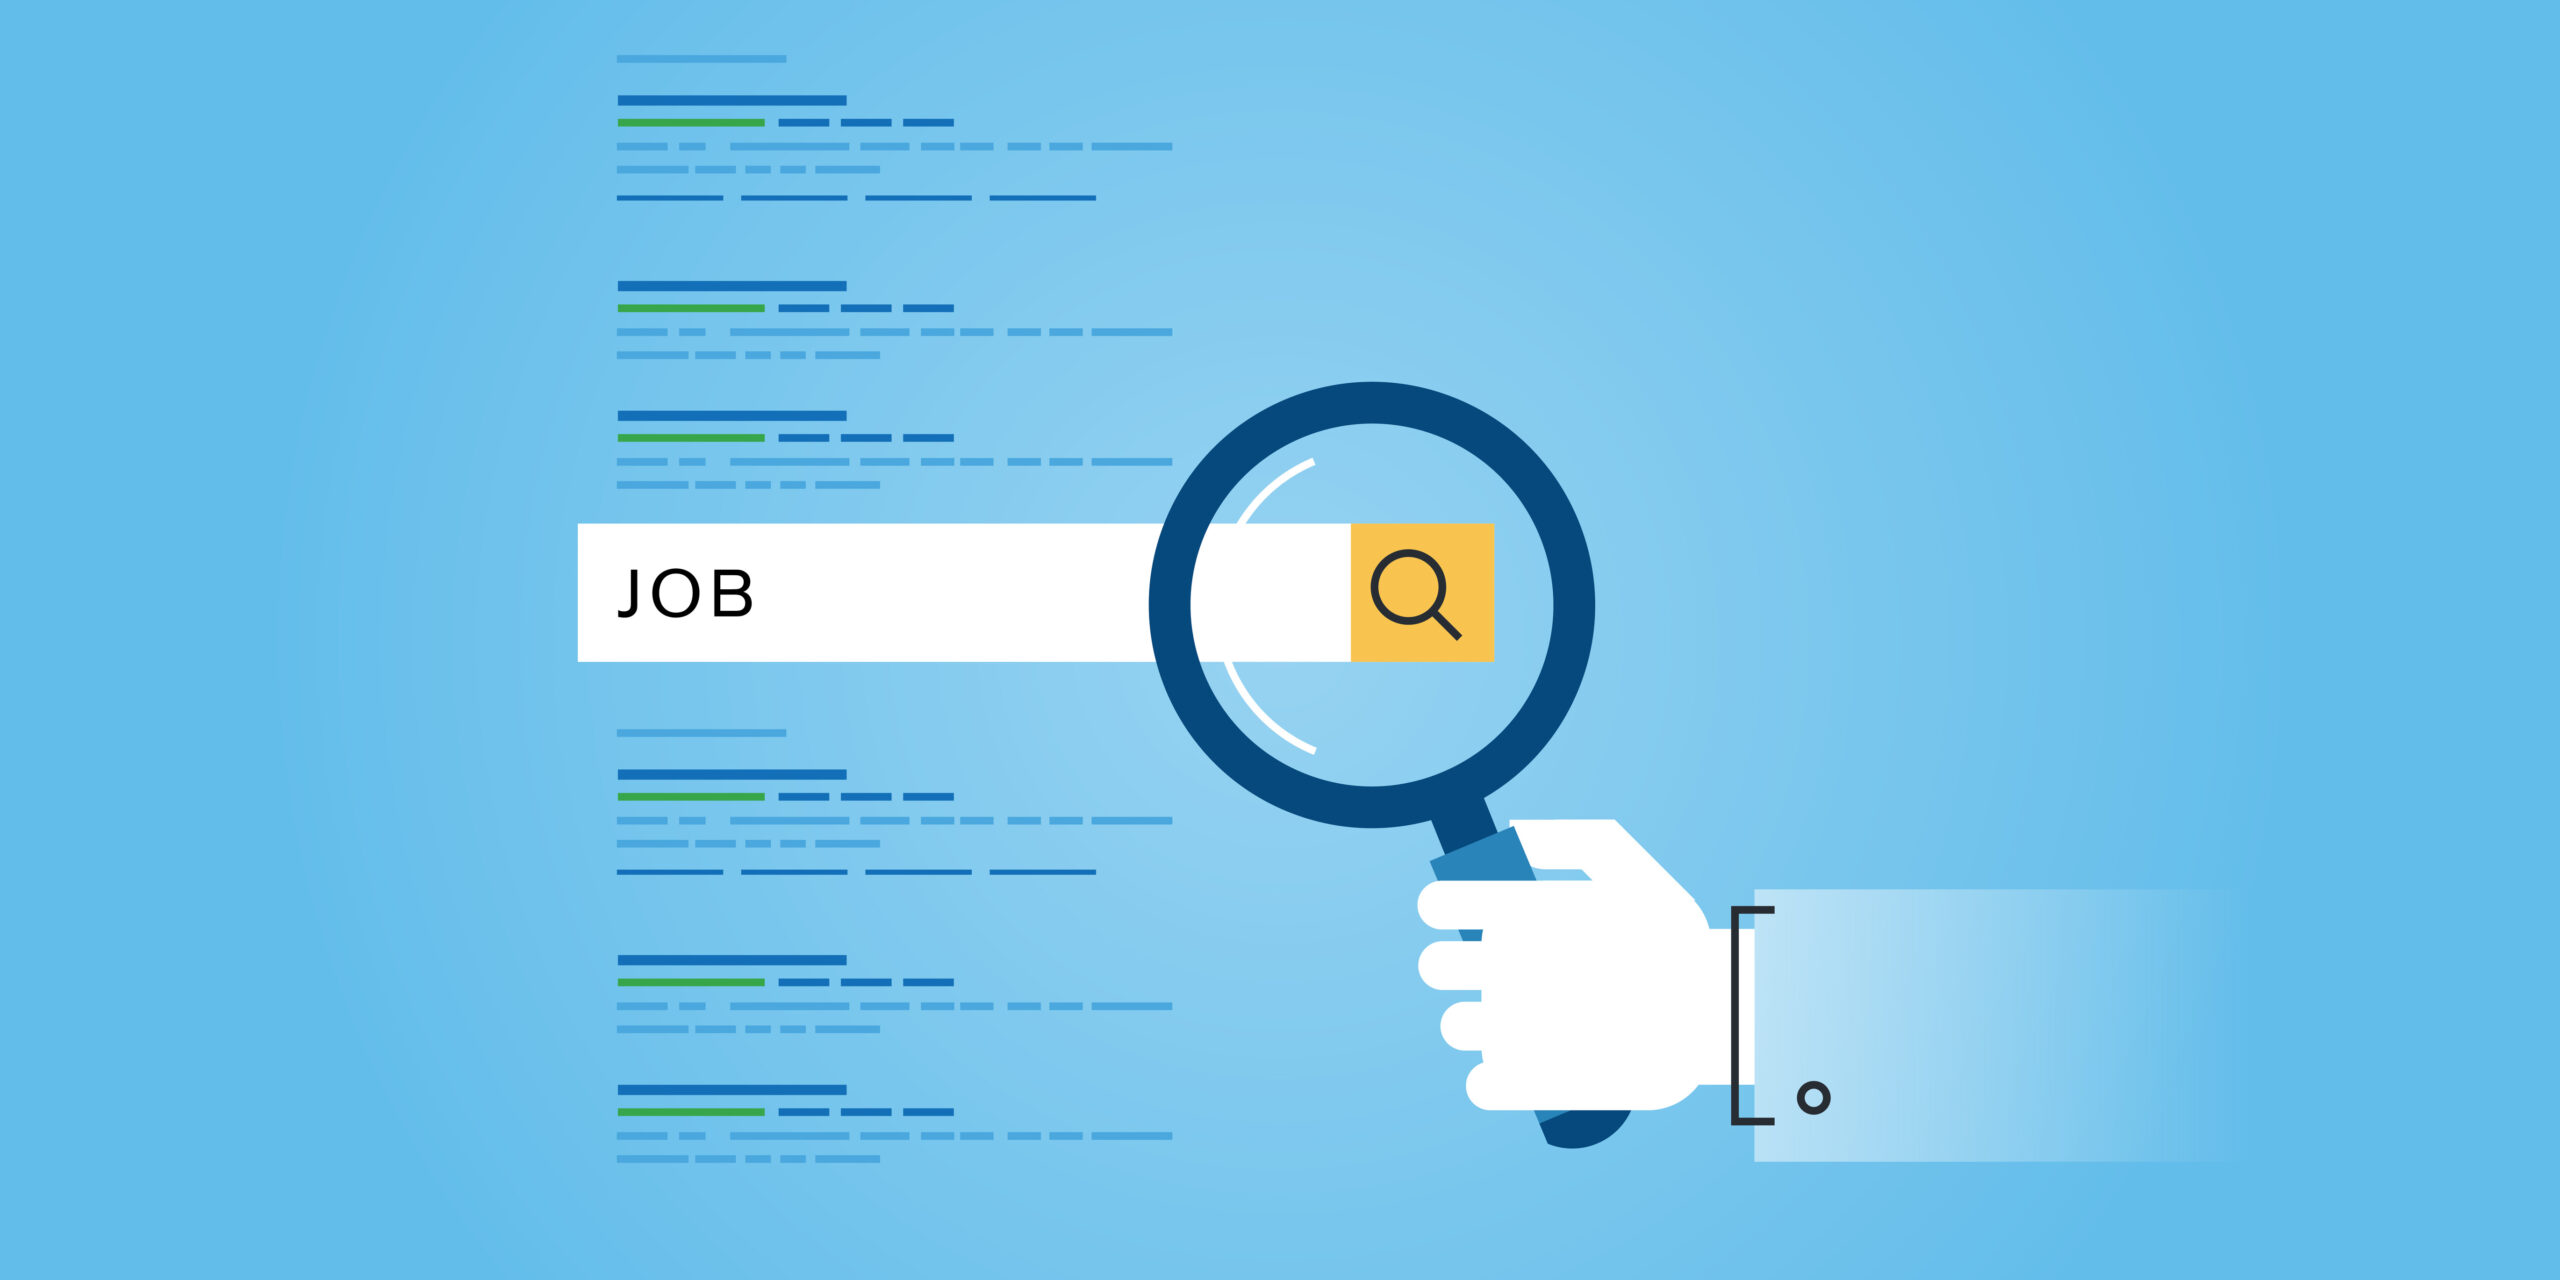 Are Job Boards the Best Way to Find Insurance Talent?